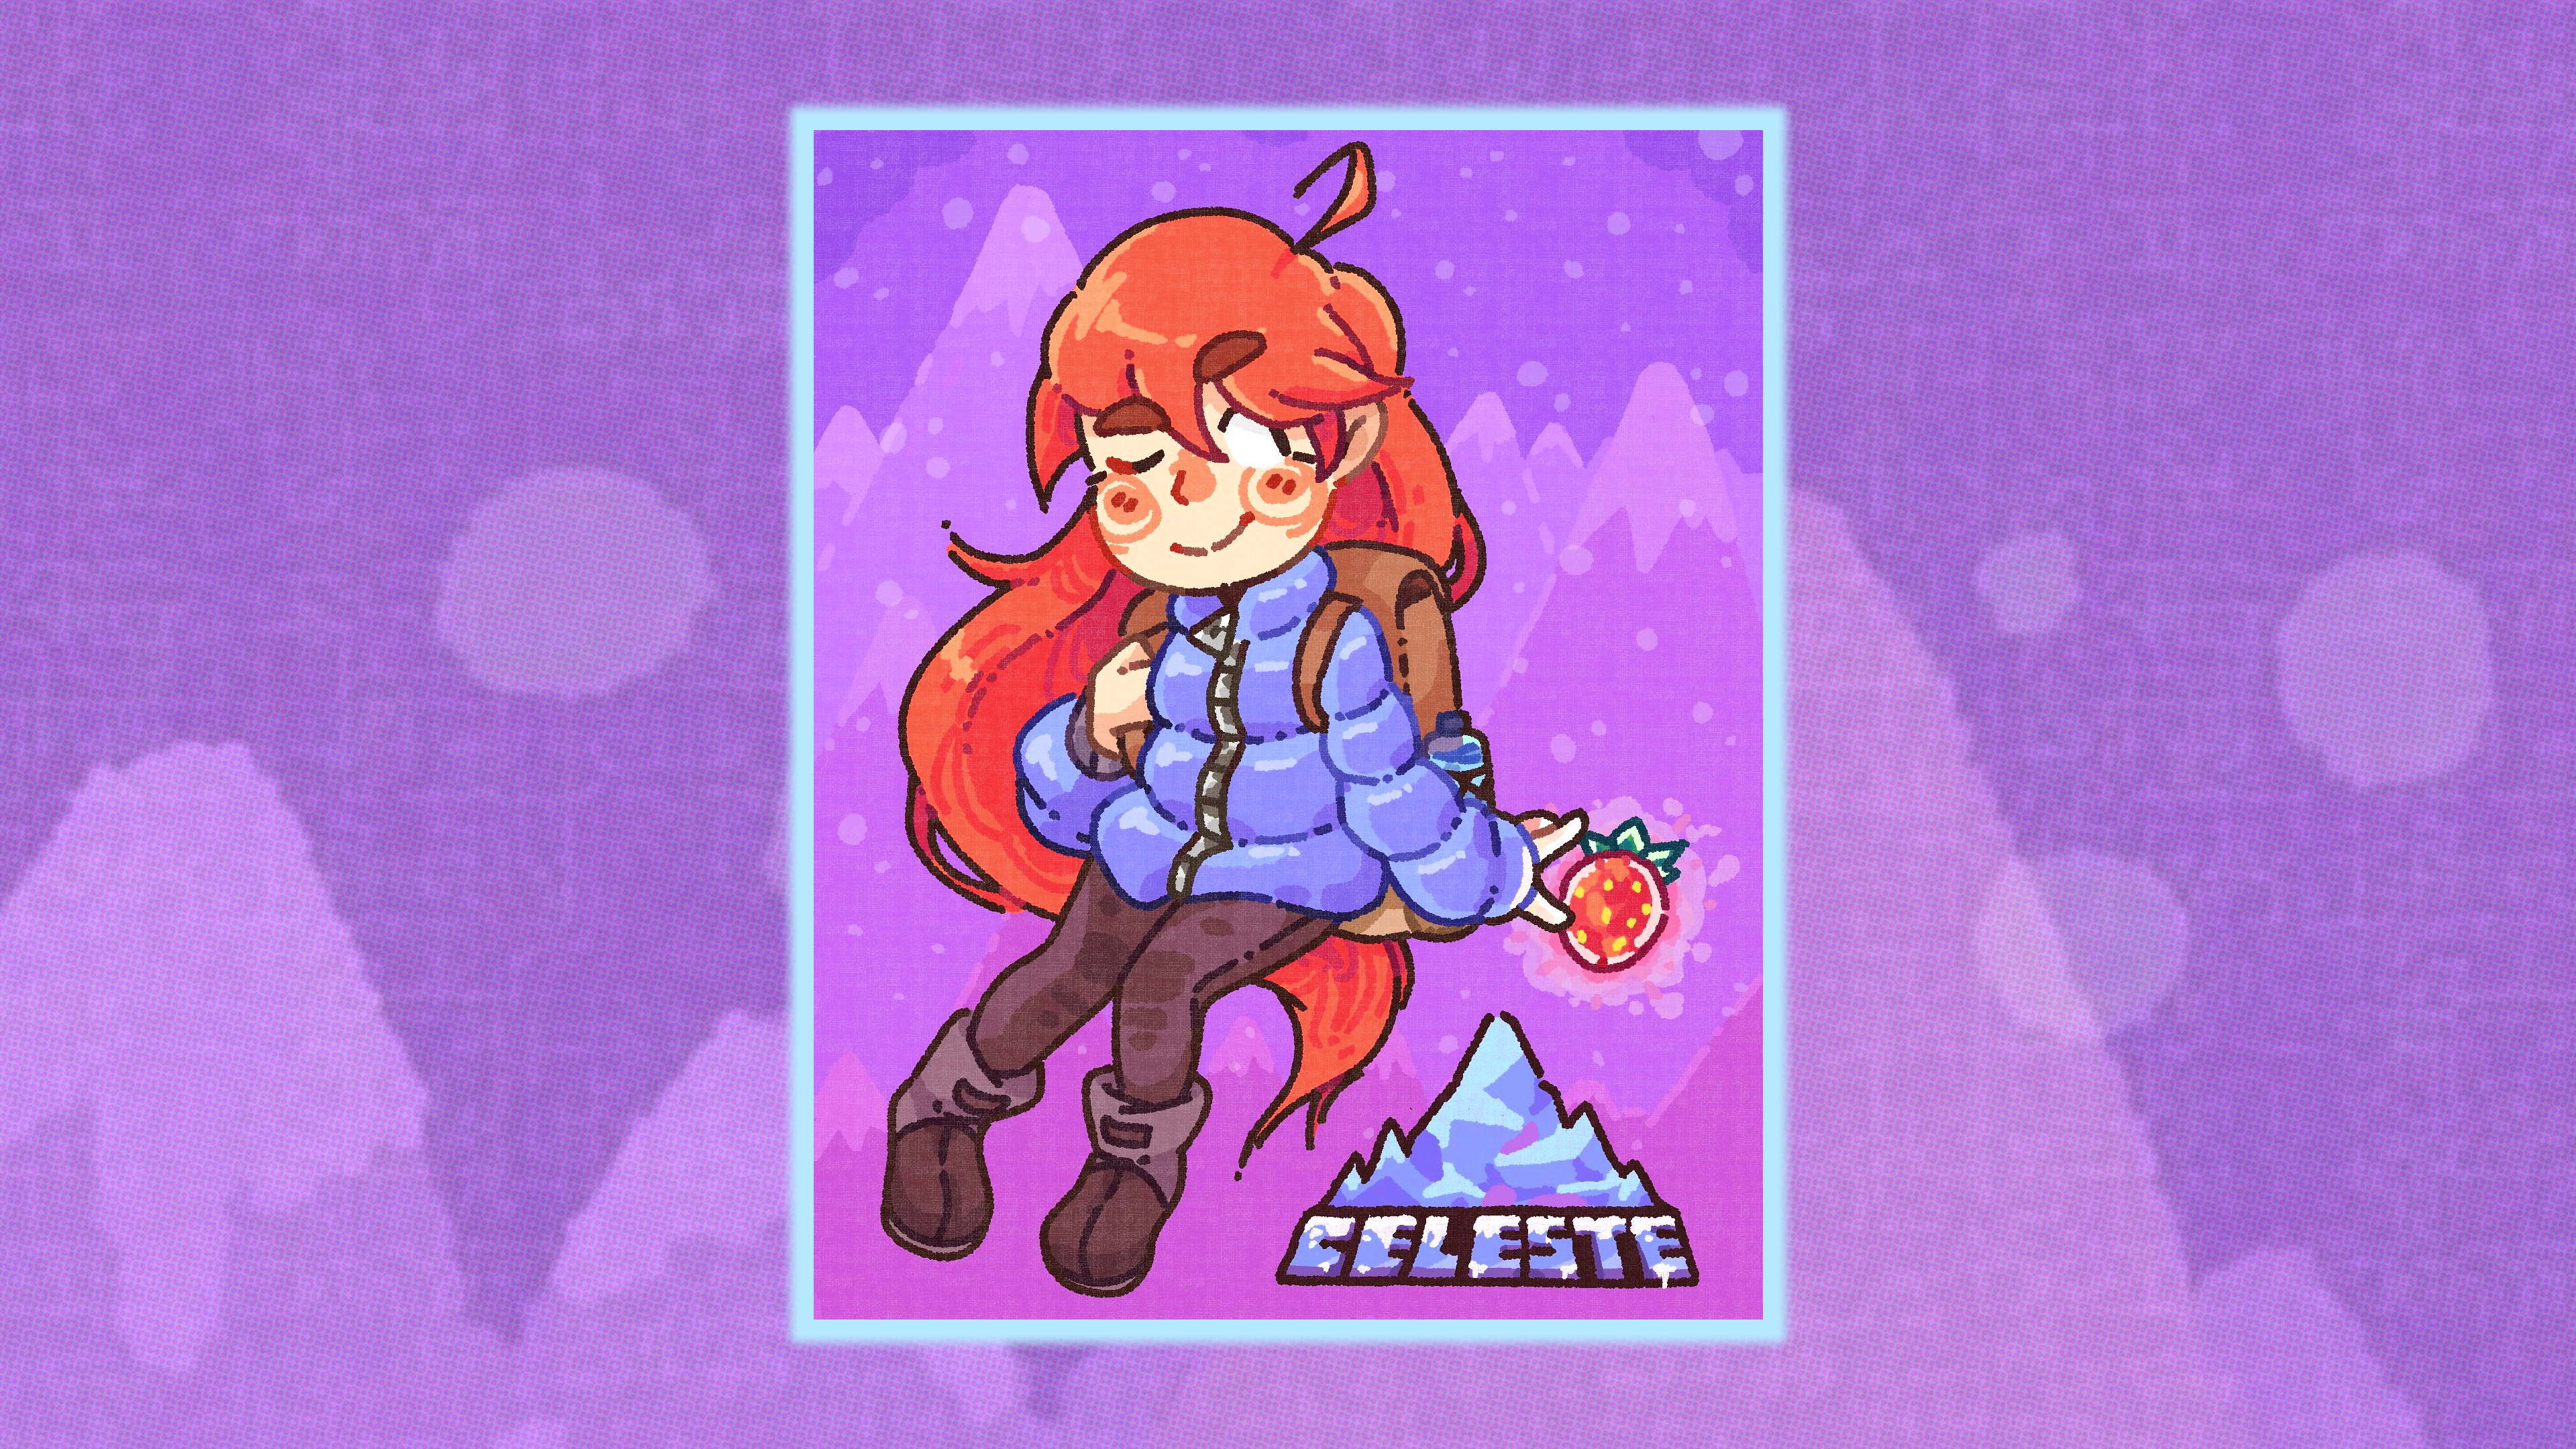 General 3840x2160 Celeste (Game) Madeline strawberries redhead boots mountains backpacks wink blushing smiling jacket video games video game girls snow snow covered snow coat long hair bangs minimalism digital art simple background cold